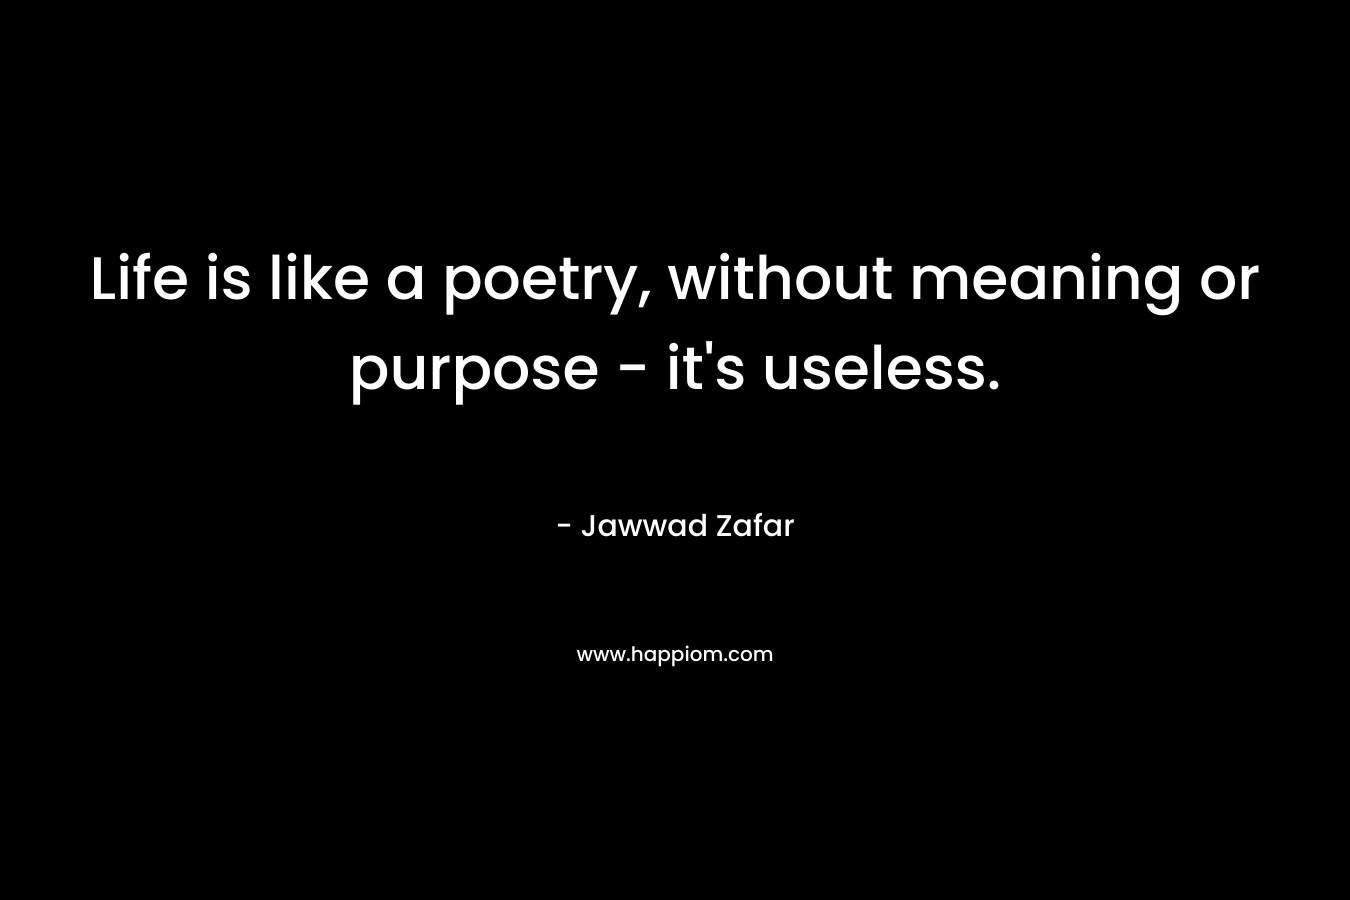 Life is like a poetry, without meaning or purpose - it's useless.